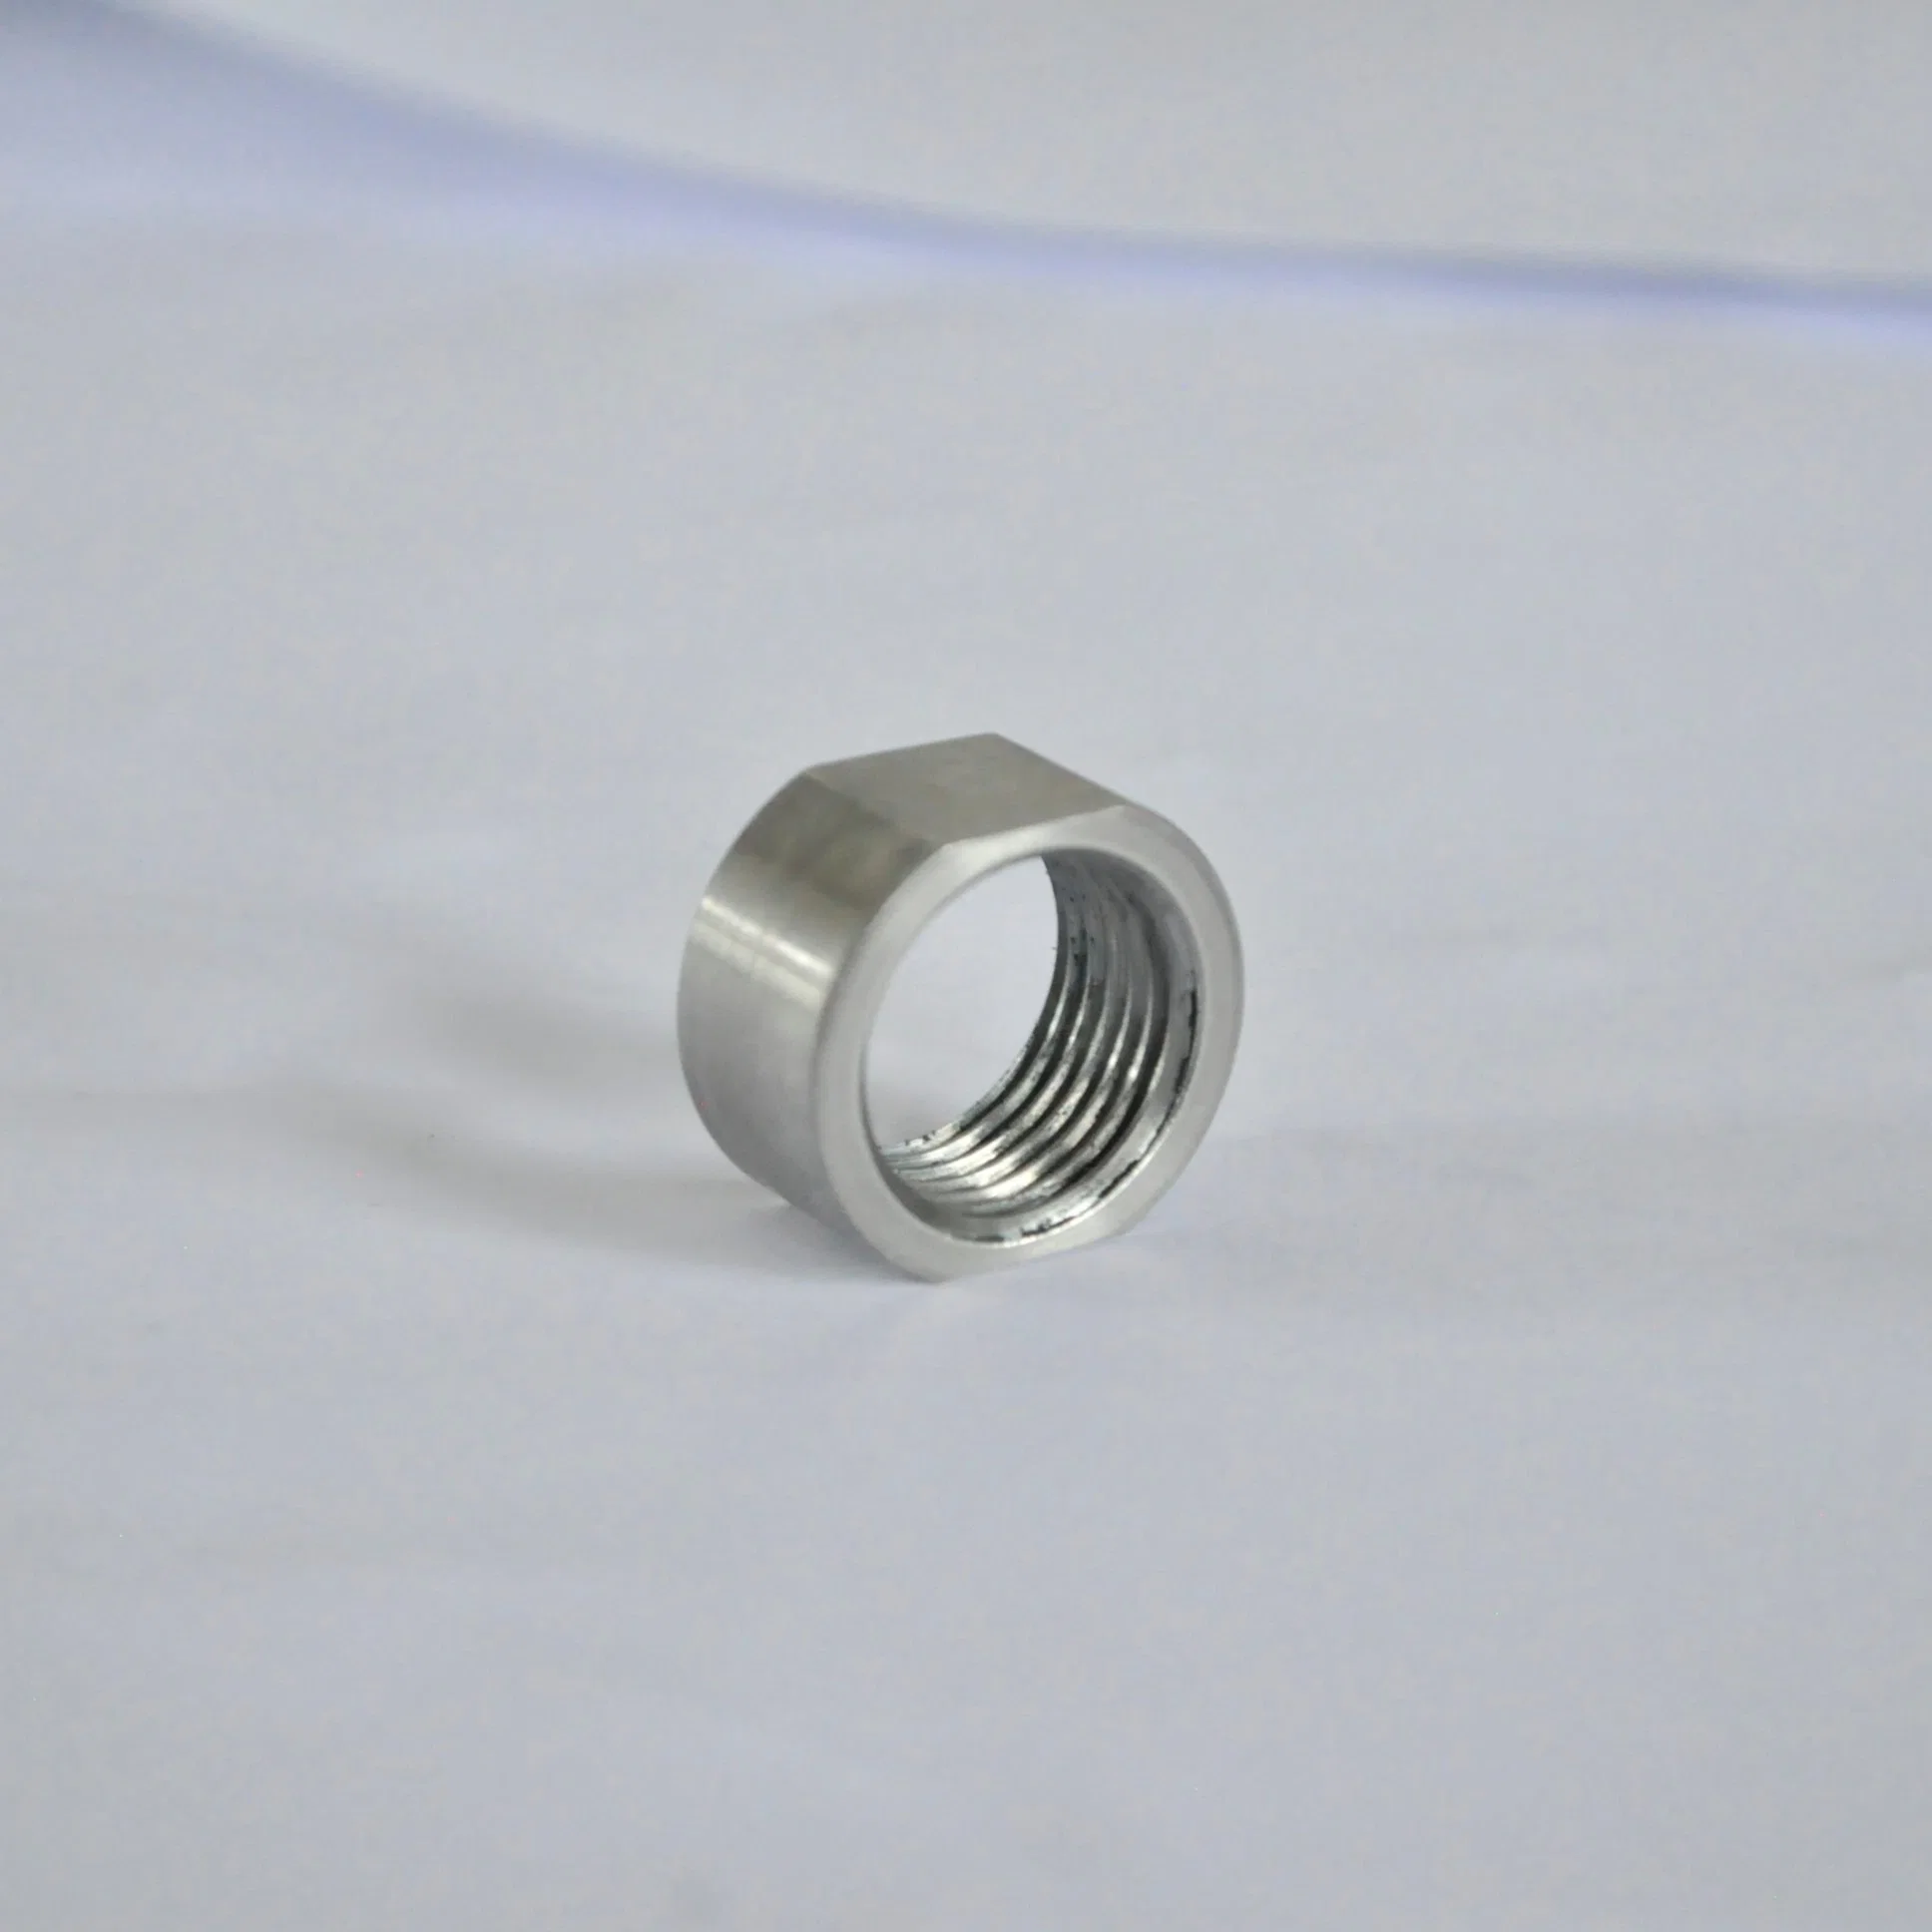 Water Jet Cutter Parts Nozzle Body Collar Yh710869-1of Waterjet Cutting Machine Head